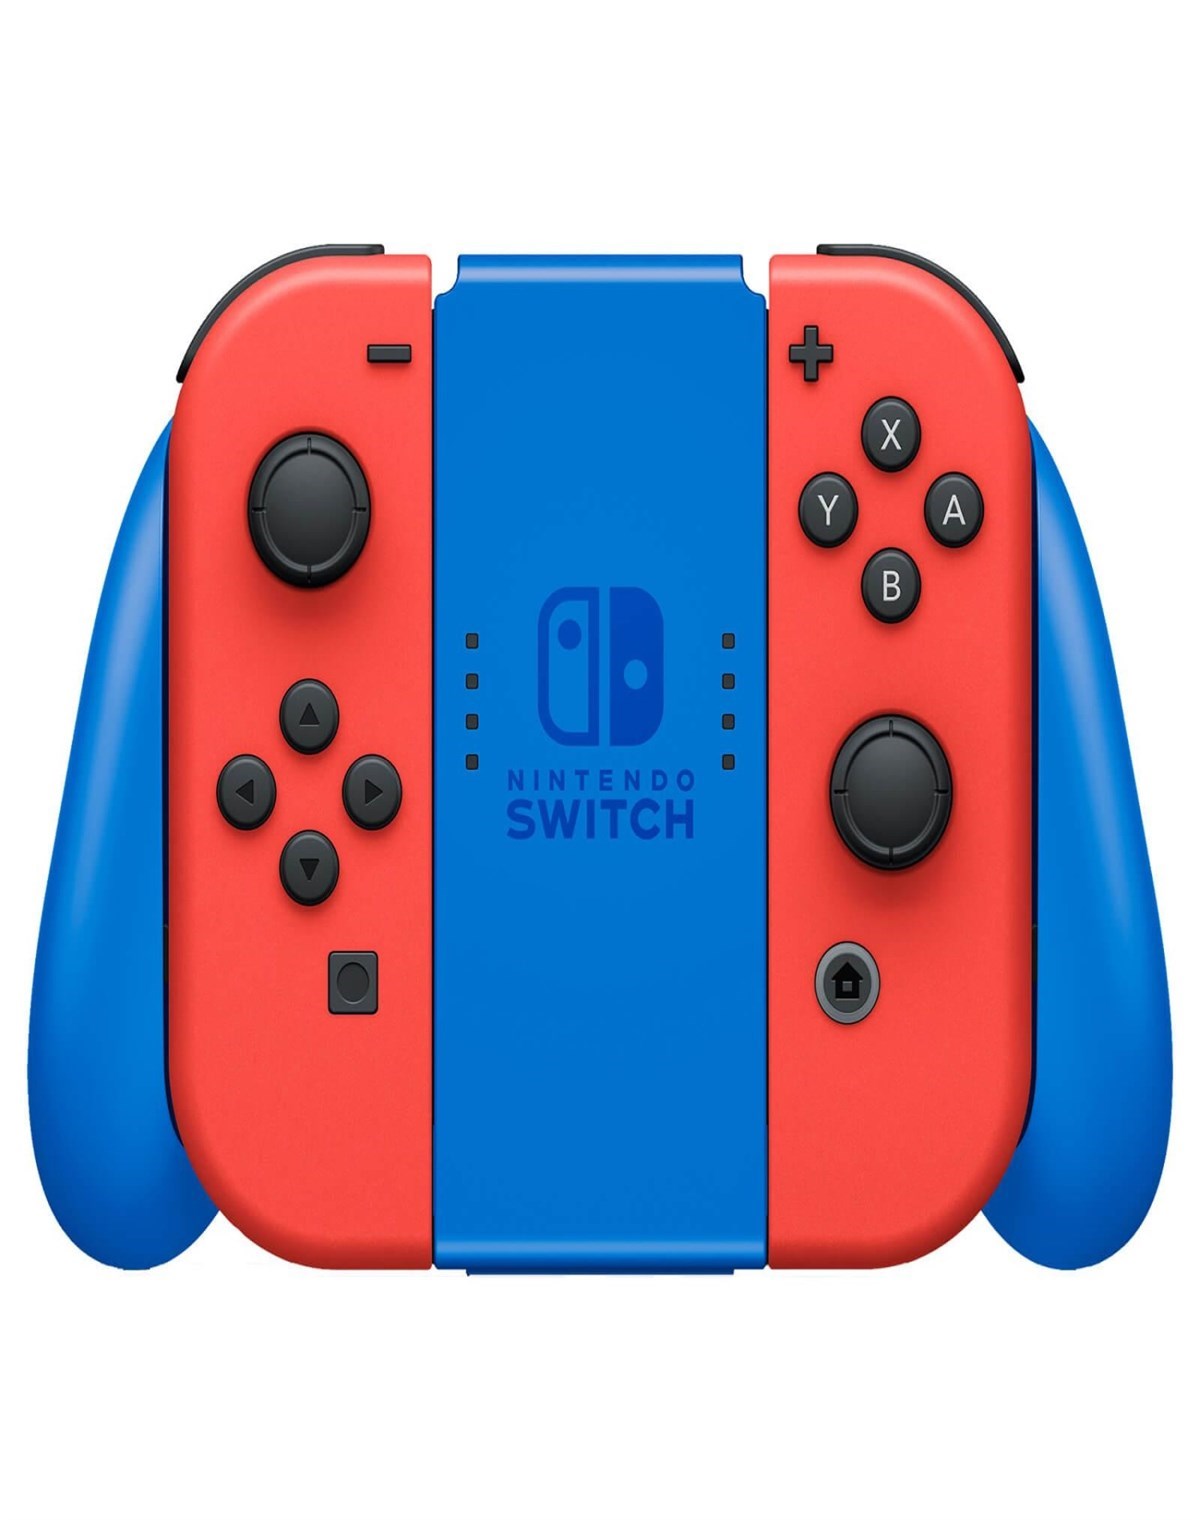 Nintendo Switch Mario Red & Blue Special Edition |Nintendo Switch Mario Red  & Blue Special Edition Cd Media | Nintendo Switch Mario Red & Blue Special  Edition Satın Al | Nintendo Switch